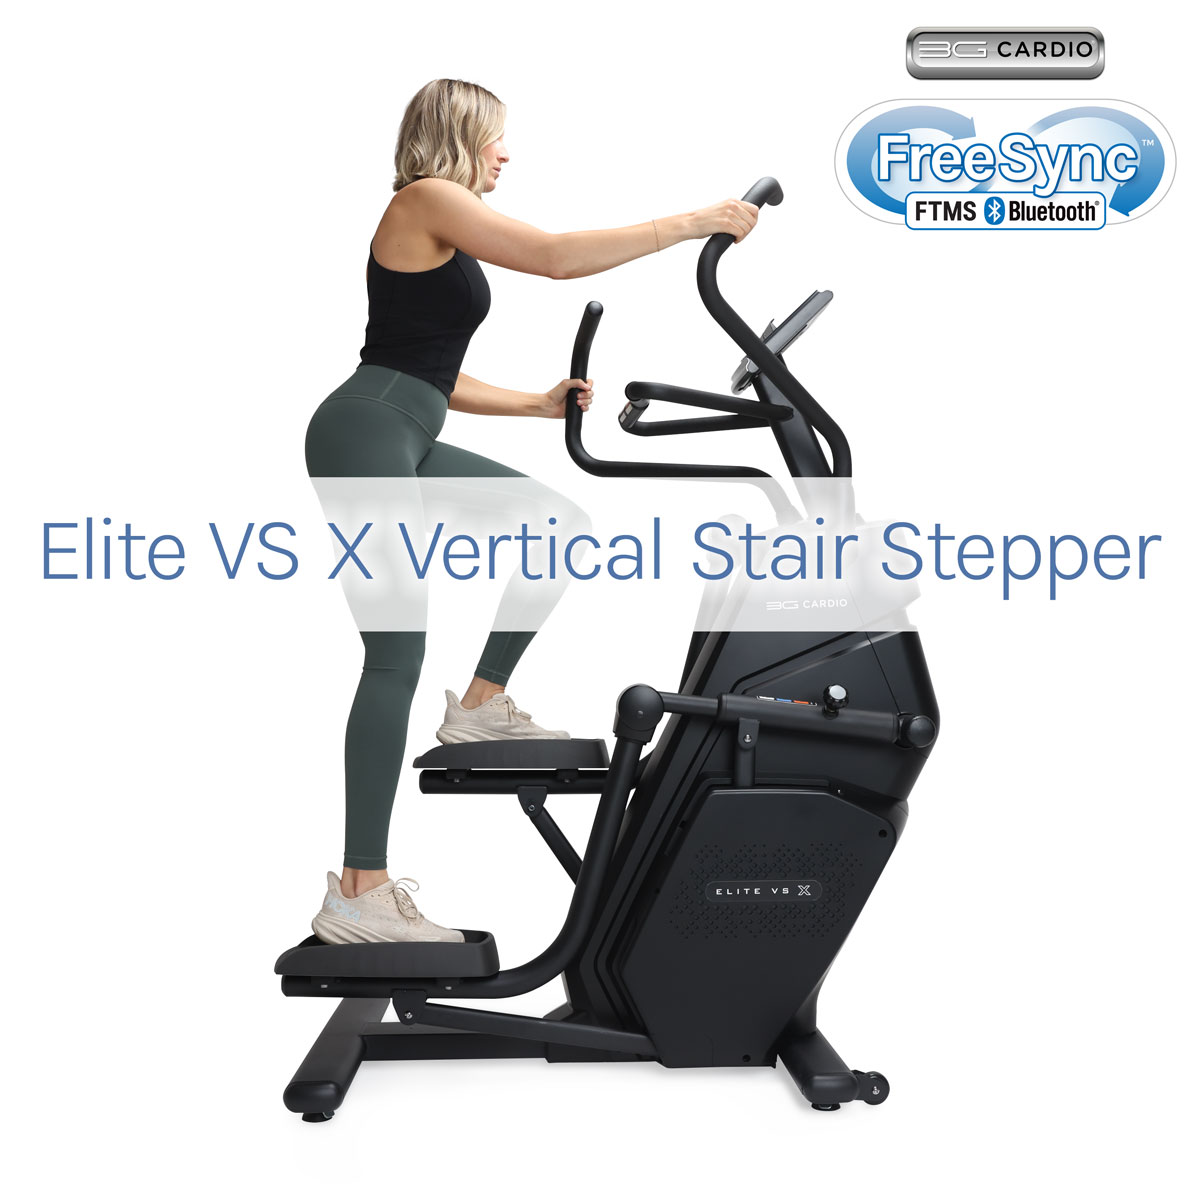 Elevate Your Fitness Routine: The 3G Cardio Elite VS X Vertical Stair Stepper